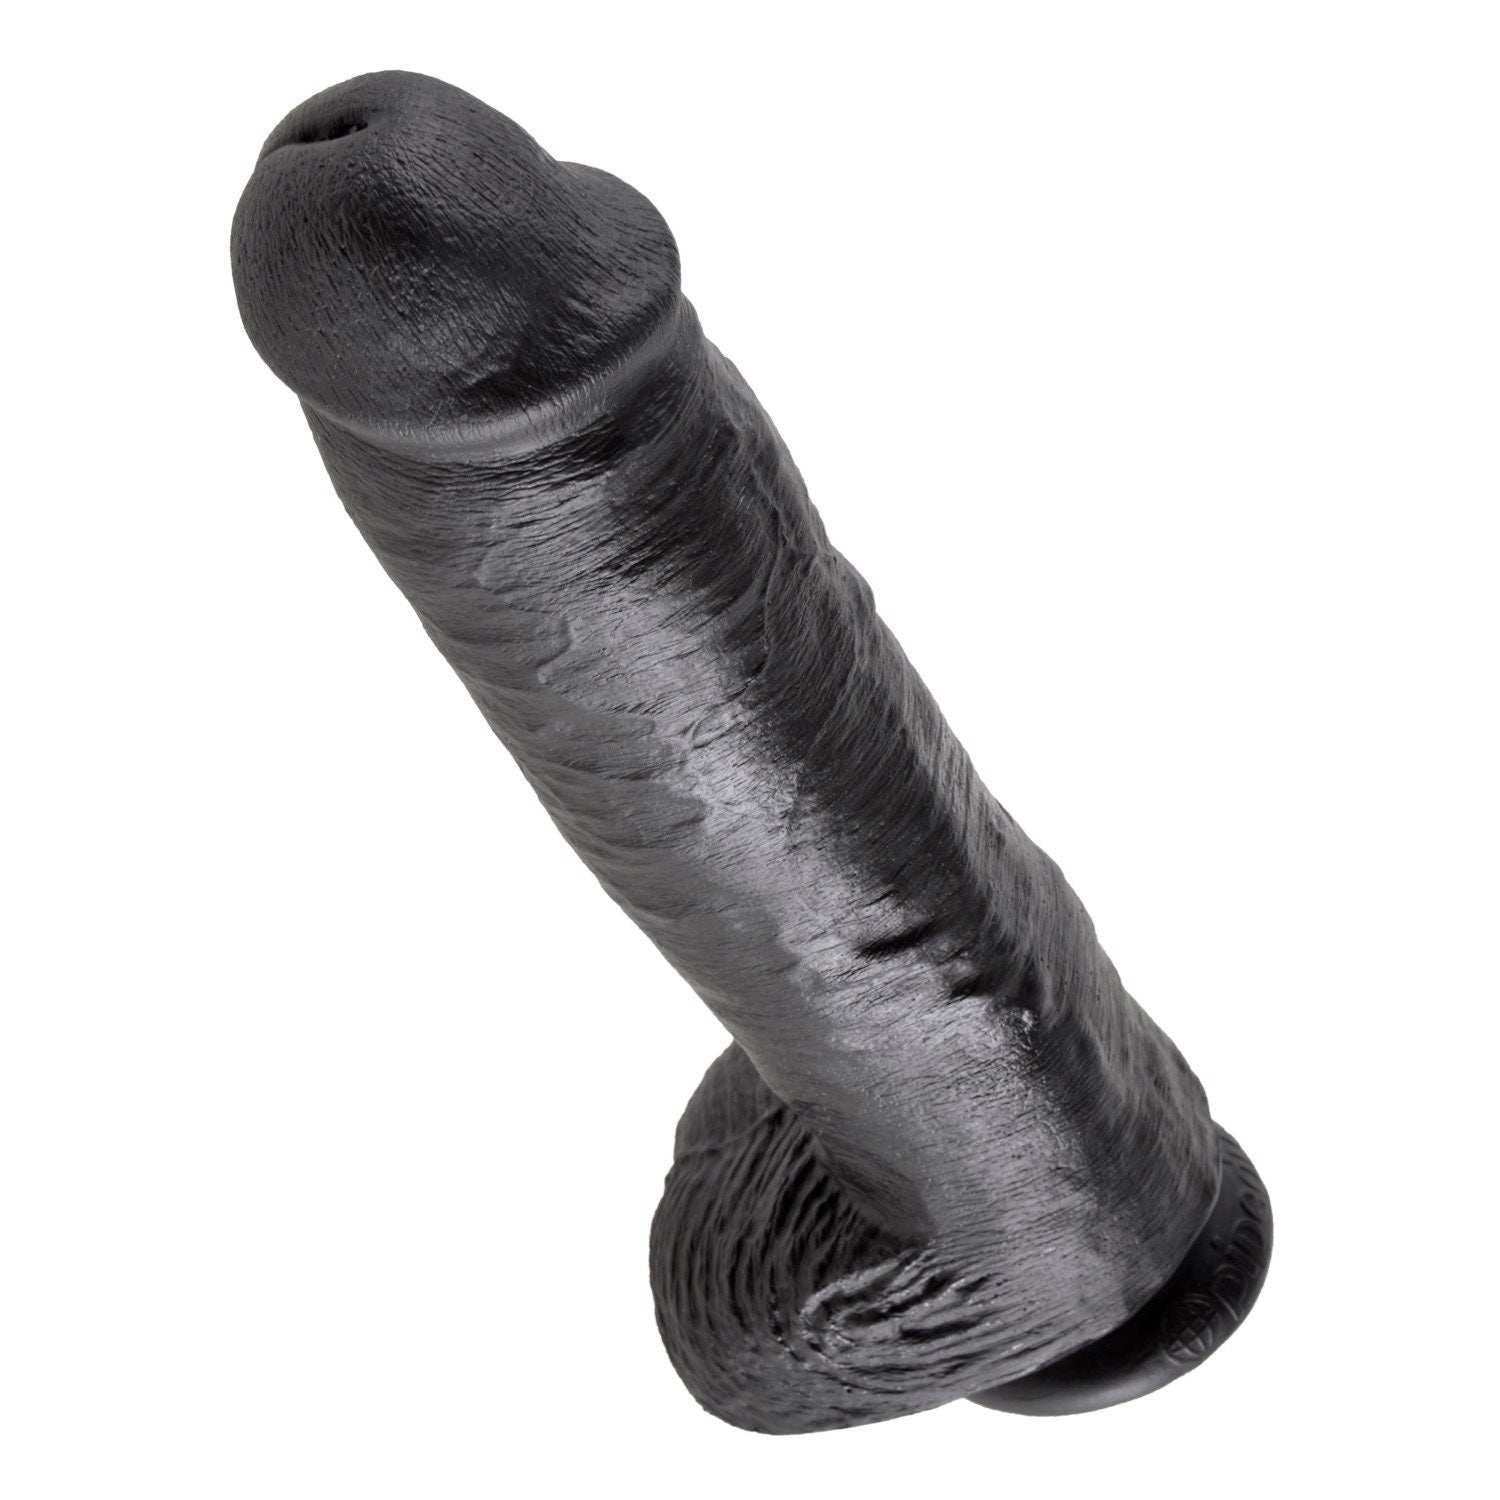 King Cock 11&quot; Cock With Balls - Black 28 cm (11&quot;) Dong by Pipedream